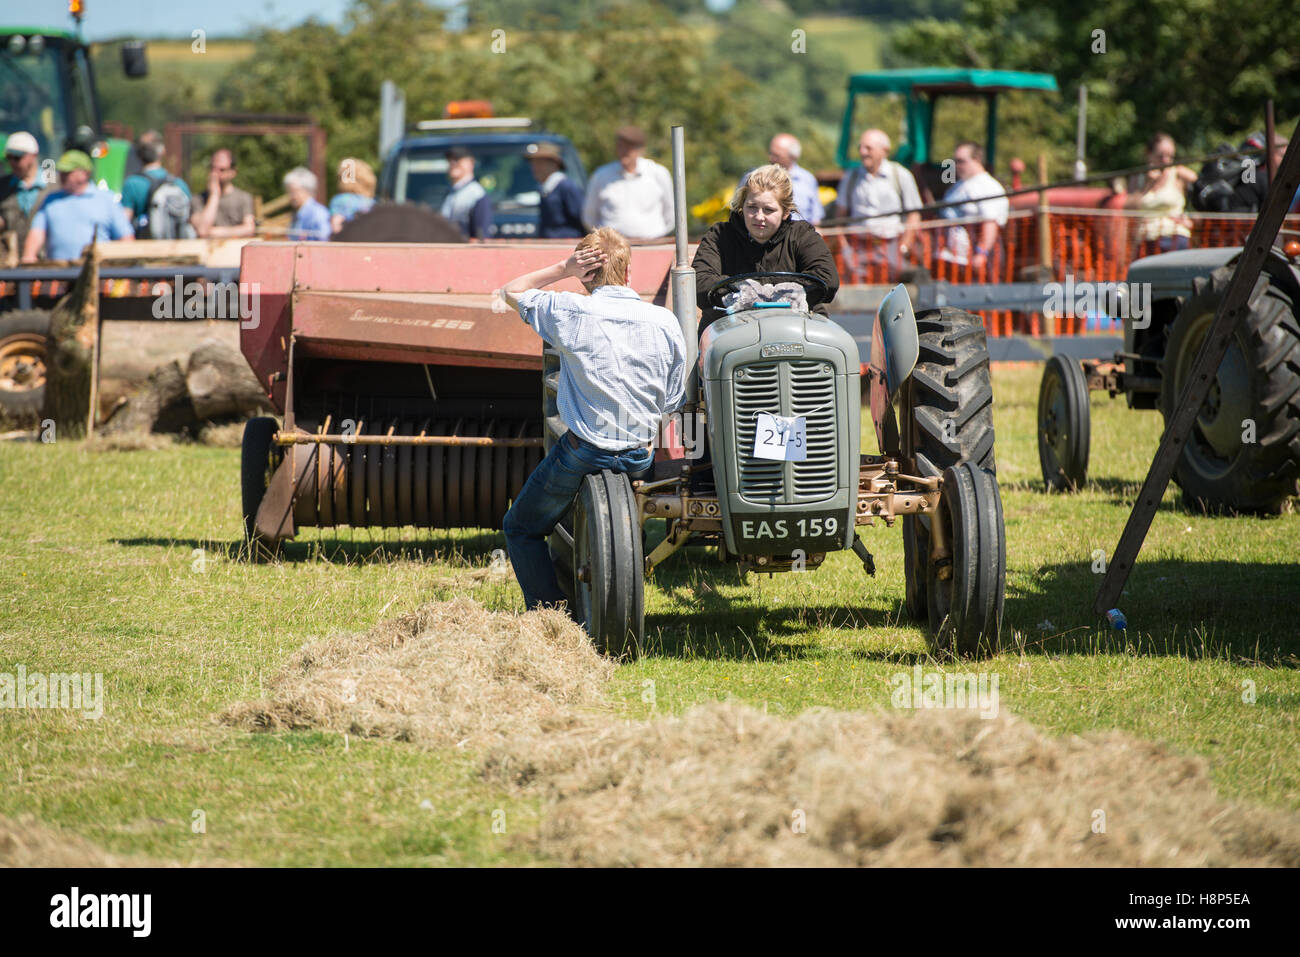 England, Yorkshire - Tractors being shown at the Masham Steam Rally, an antique show for old tractors, cars, and locomotives in Stock Photo